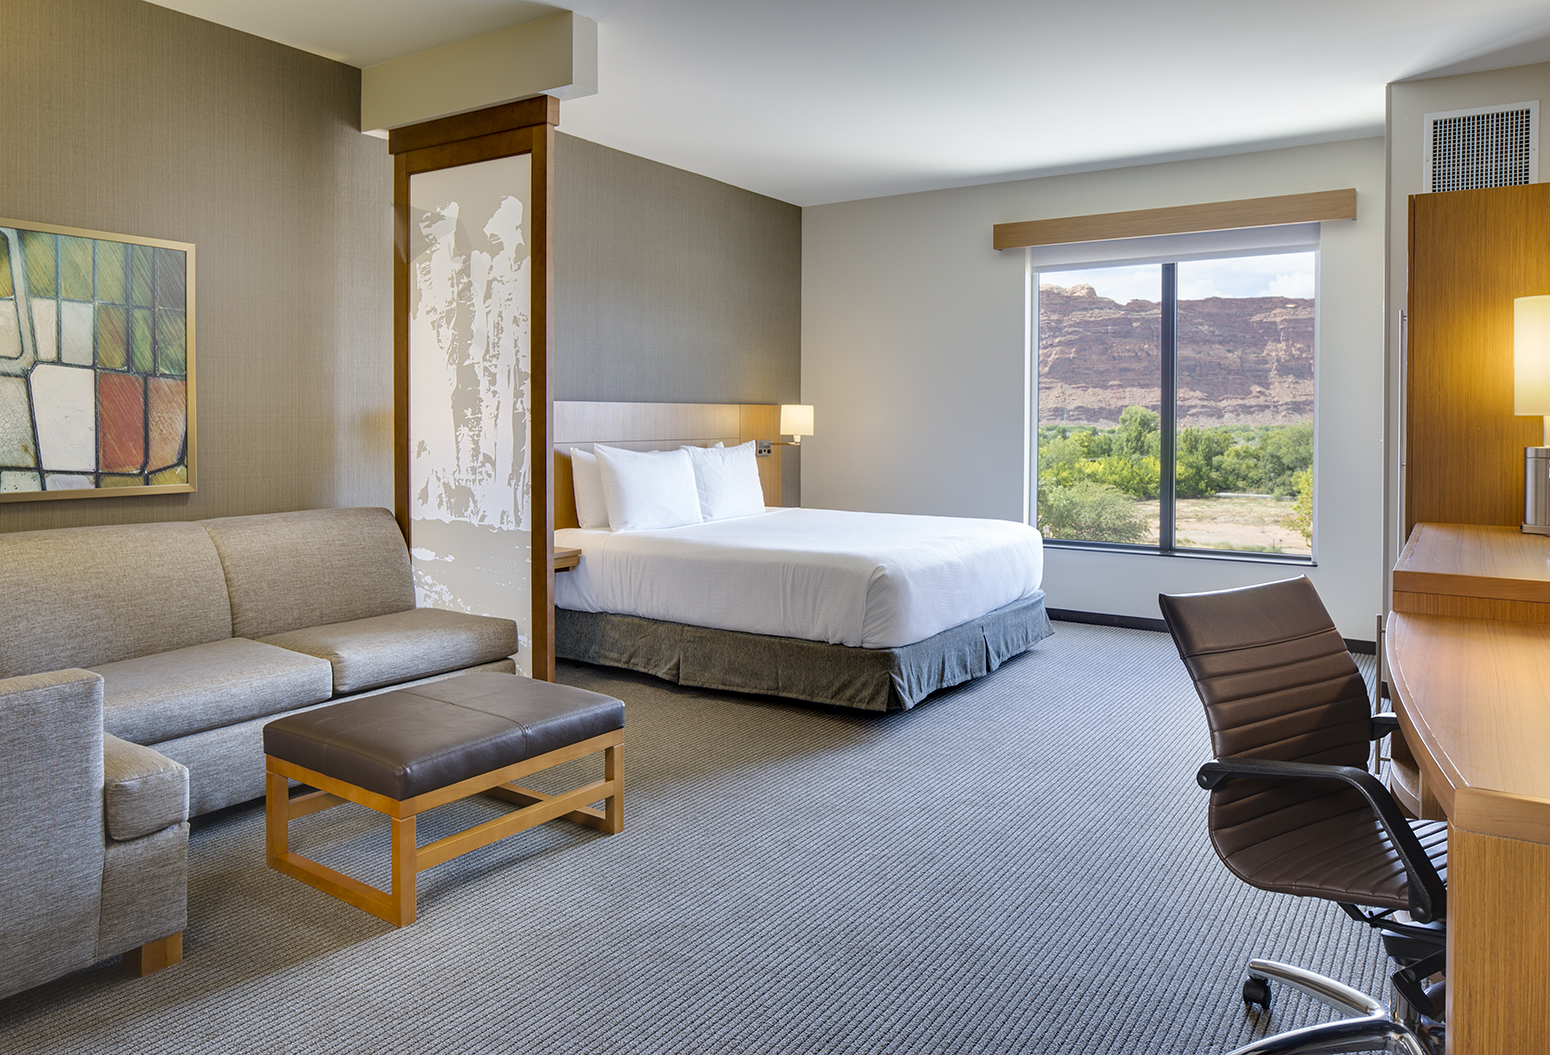 Daylit photograph of a comfortable suite at the Hyatt Hotel in Moab, UT. The viewer sees a modern desk and sofa in the forground with a kingsize bed next to the window that has views of thr red rock country and green cottonwood trees